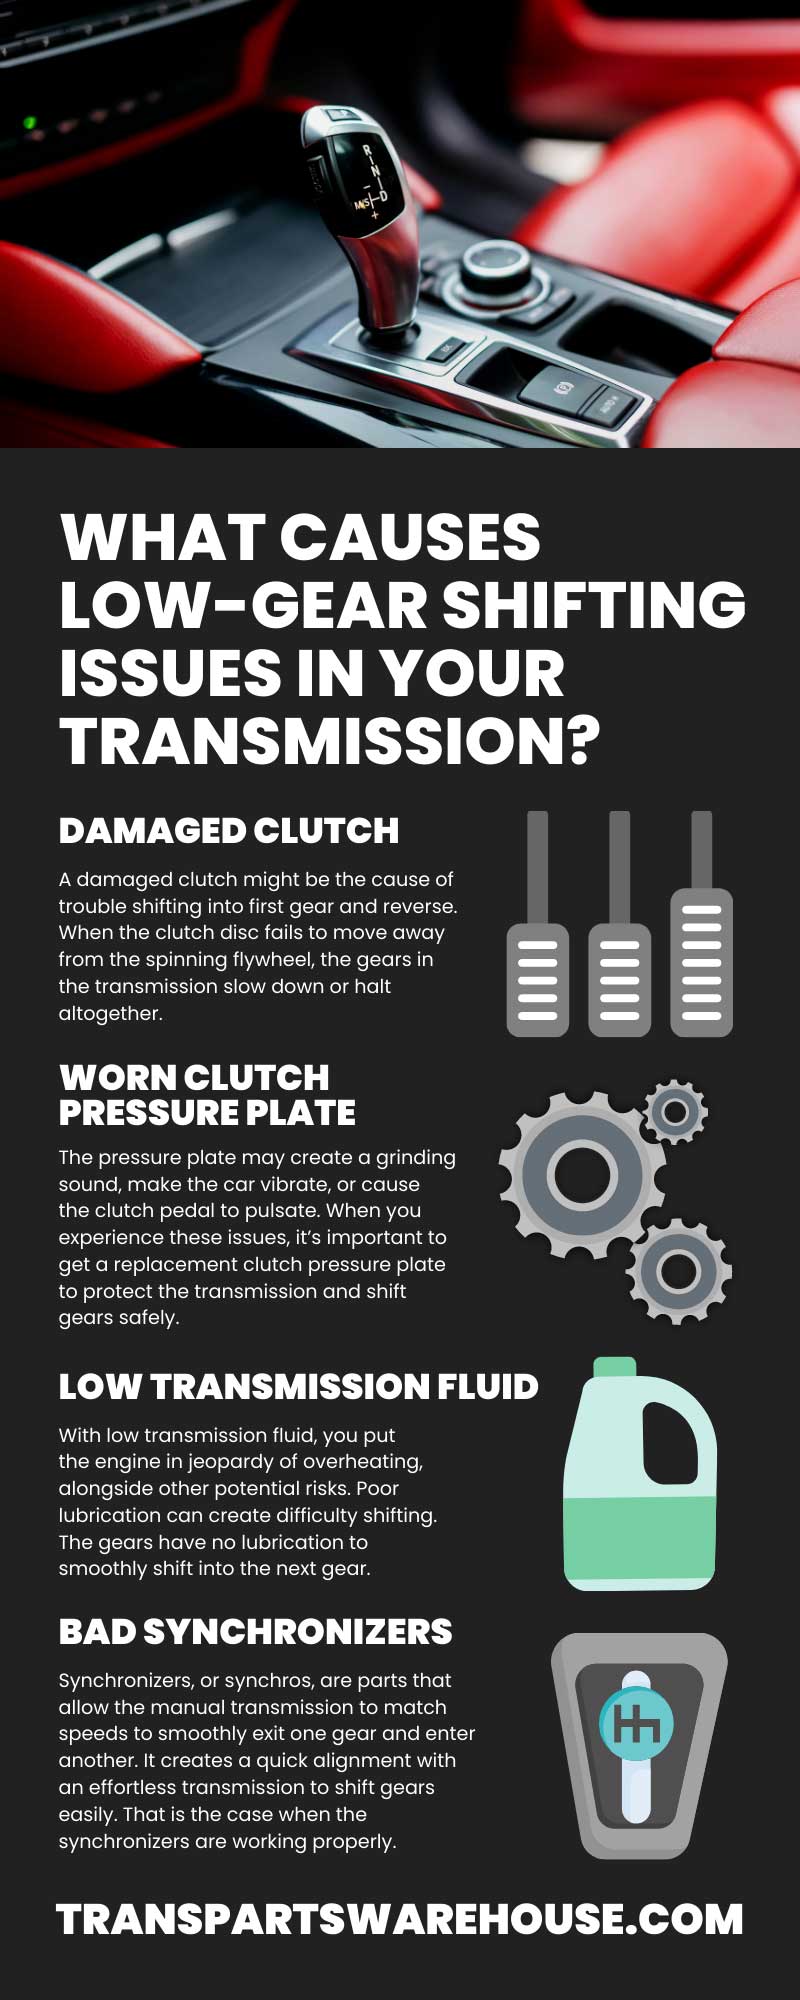 What Causes Low-Gear Shifting Issues in Your Transmission?
